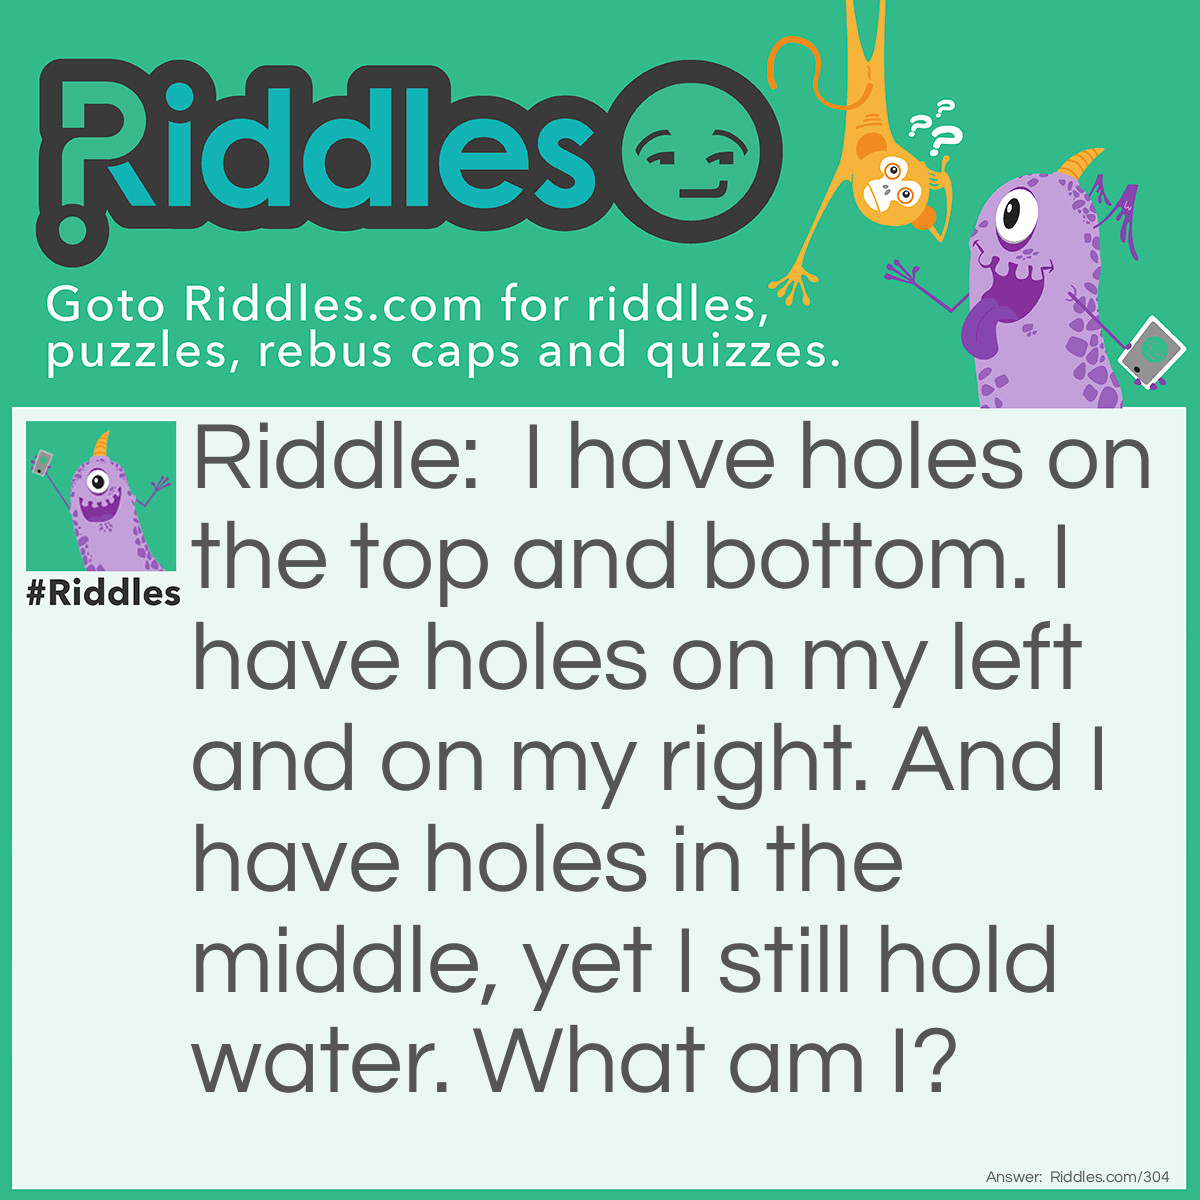 Riddle: I have holes on the top and bottom. I have holes on my left and on my right. And I have holes in the middle, yet I still hold water. What am I? Answer: I'm a Sponge.